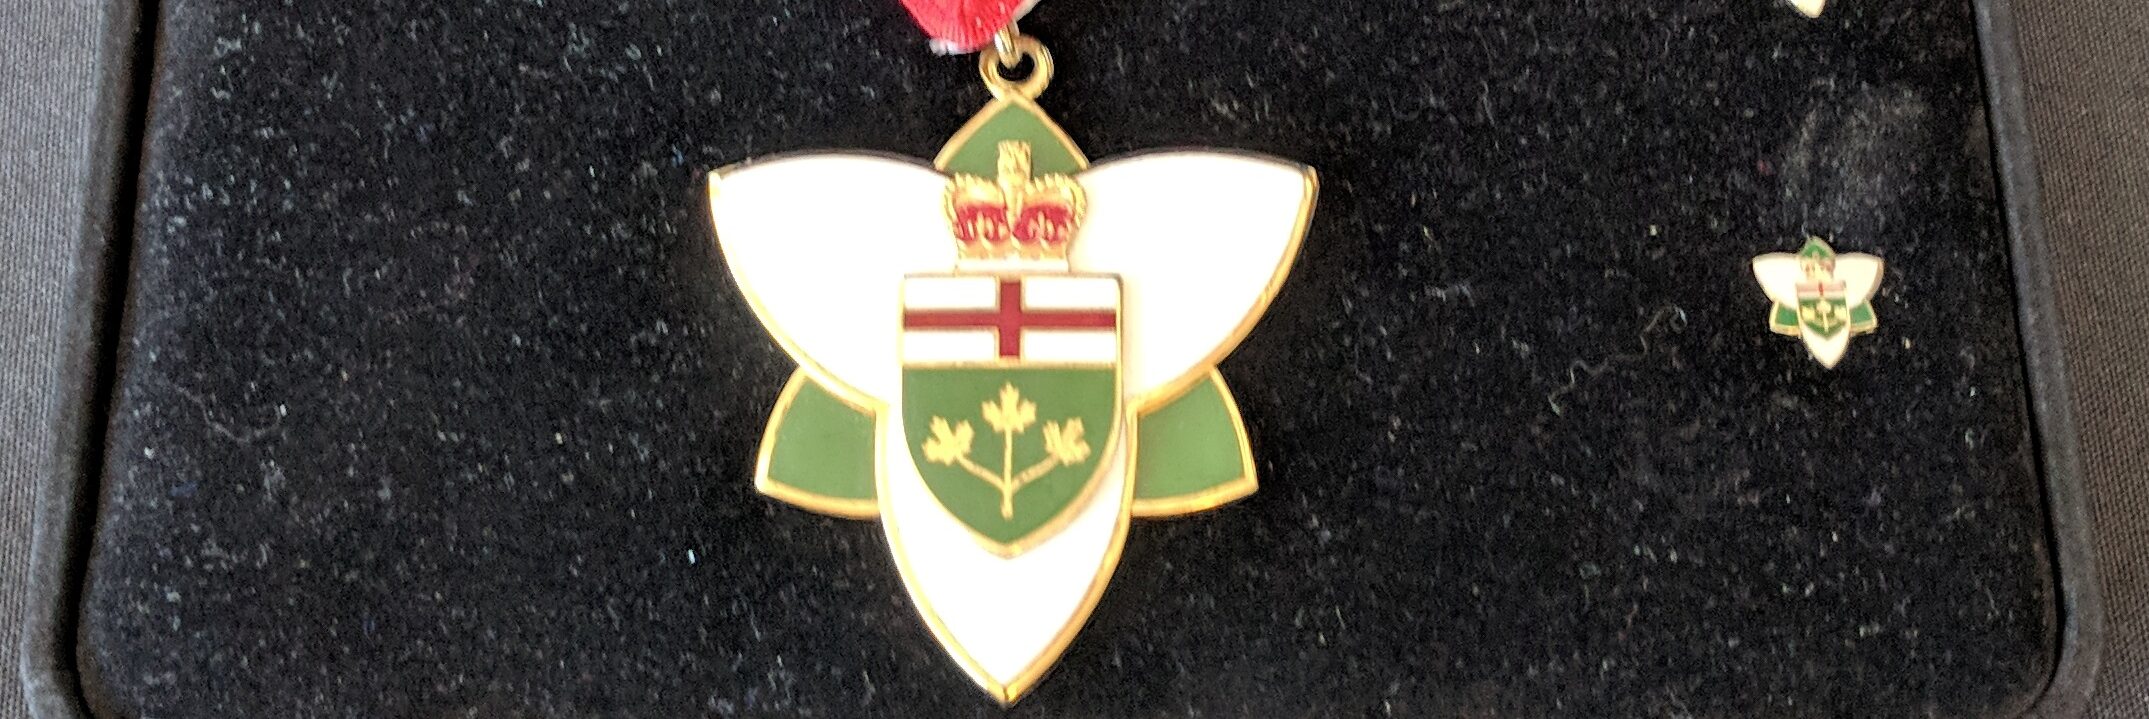 Order of Ontario medal (source: Wikimedia Commons)